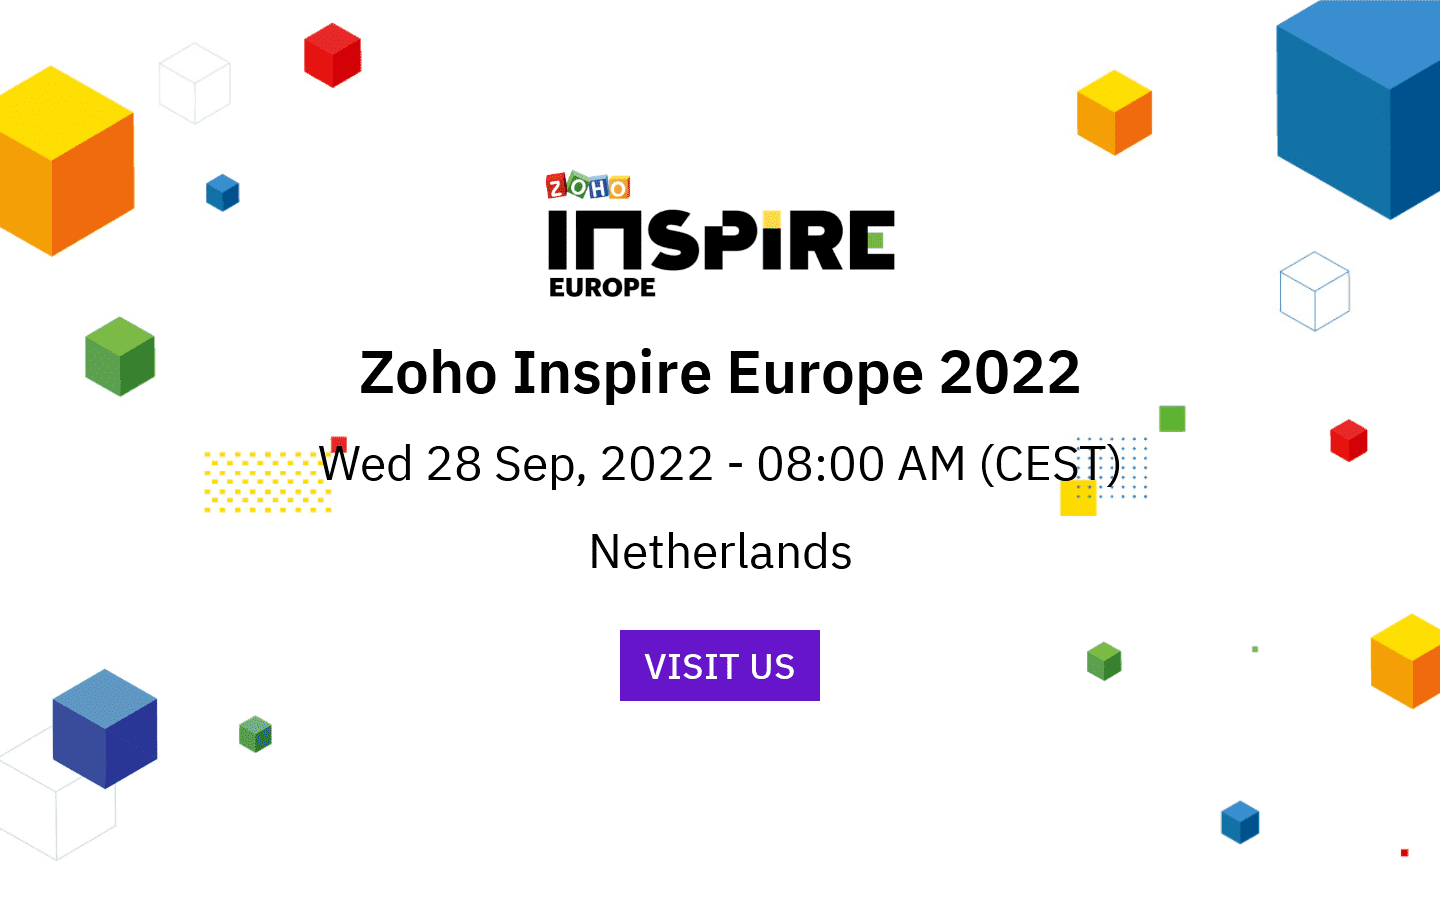 Zoholics and Inspire meetings 2022